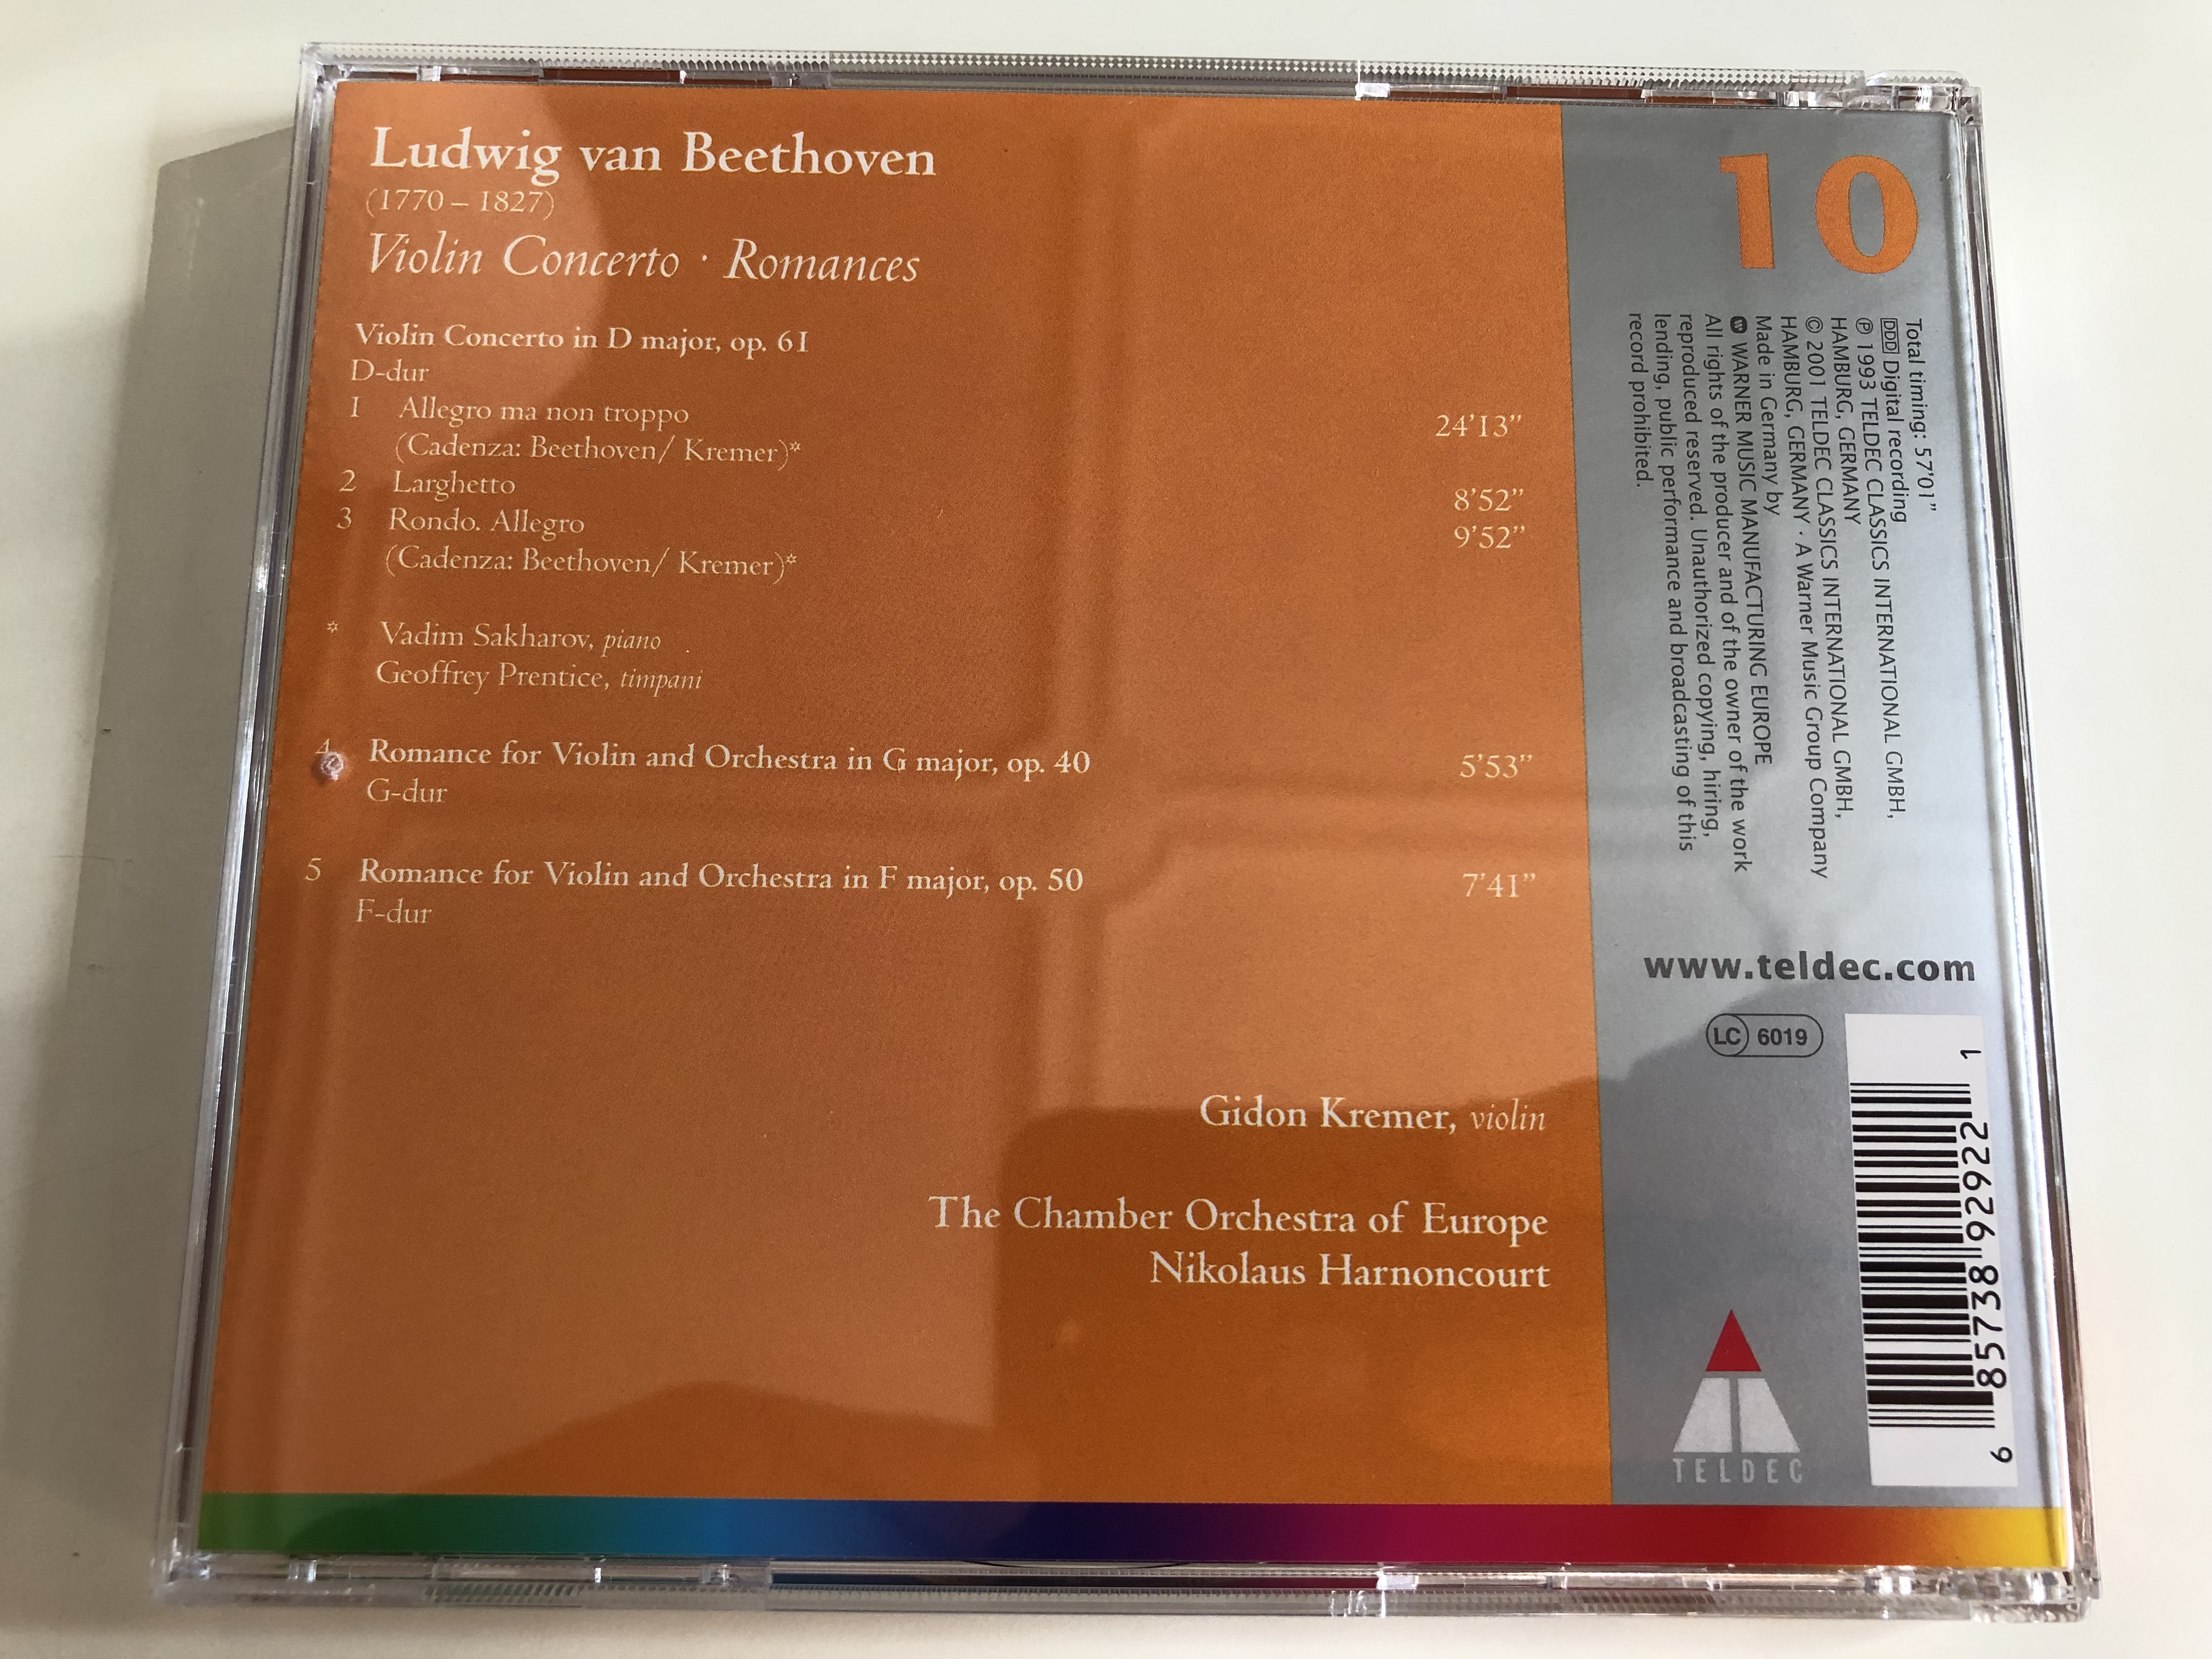 beethoven-violin-concerto-romances-gidon-kremer-the-chamber-orchestra-of-europe-conducted-by-nikolaus-harnoncourt-basic-edition-10-audio-cd-2001-5-.jpg